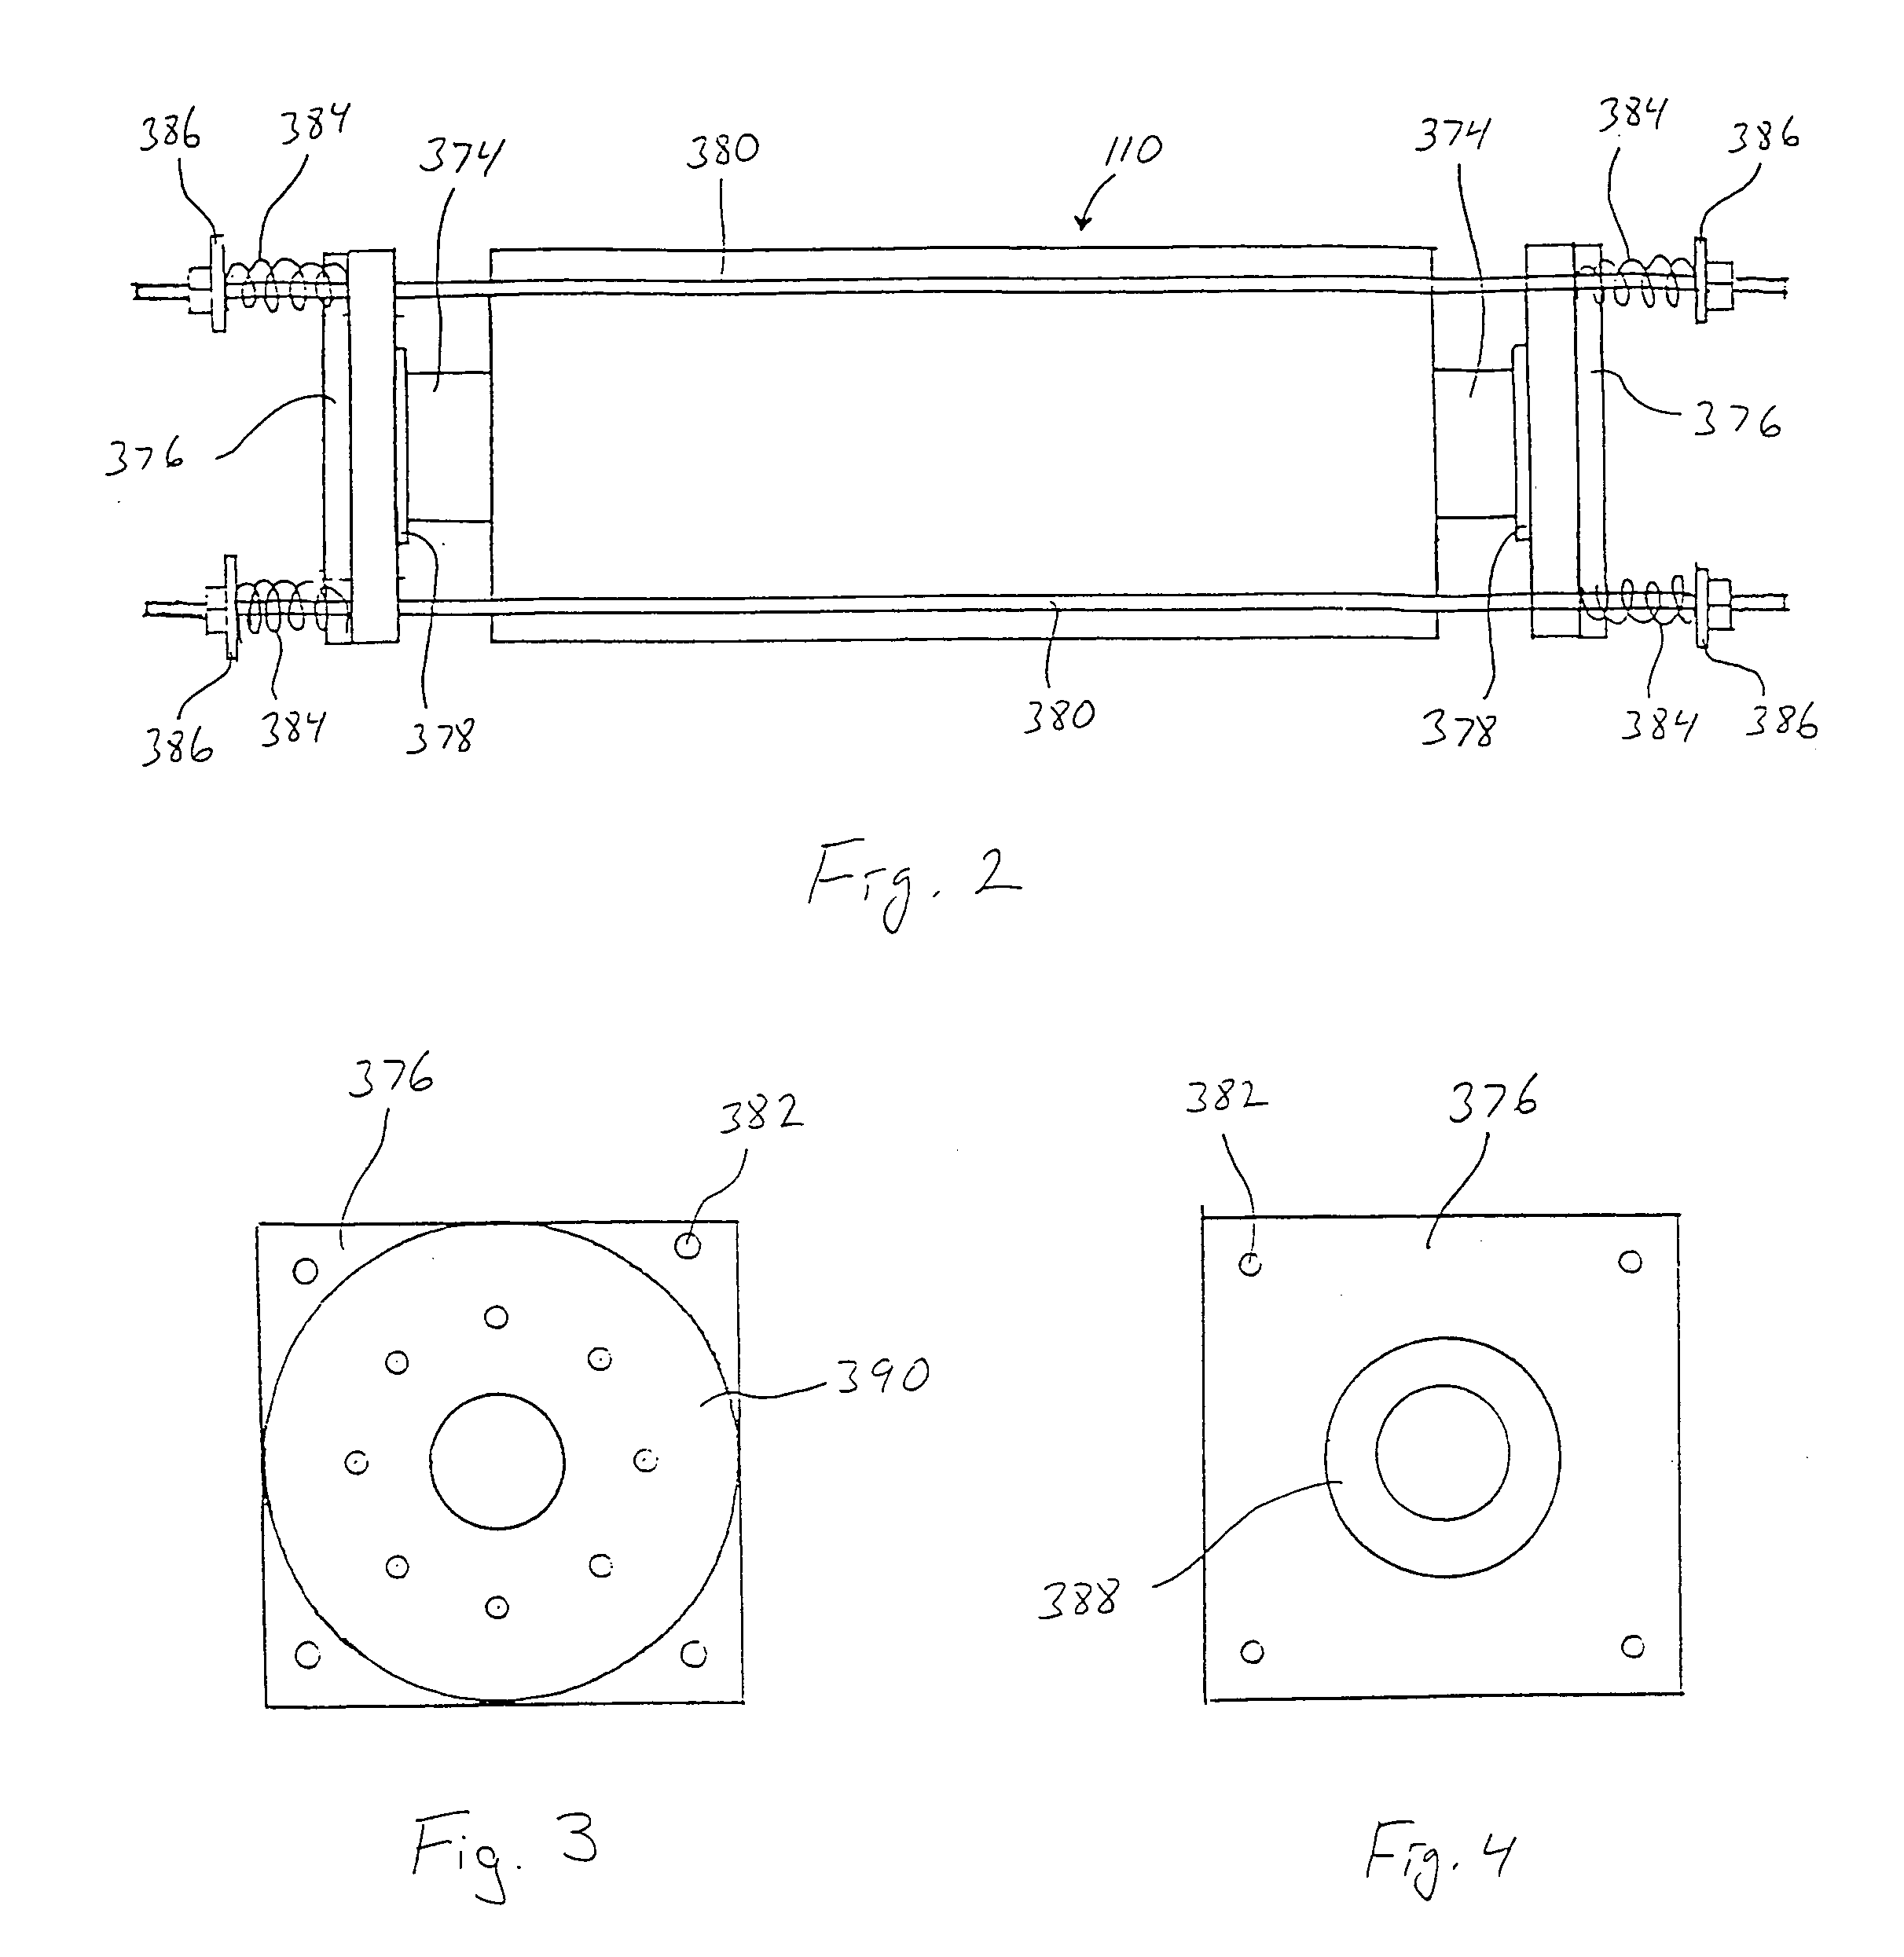 Copper powders methods for producing powders and devices fabricated from same